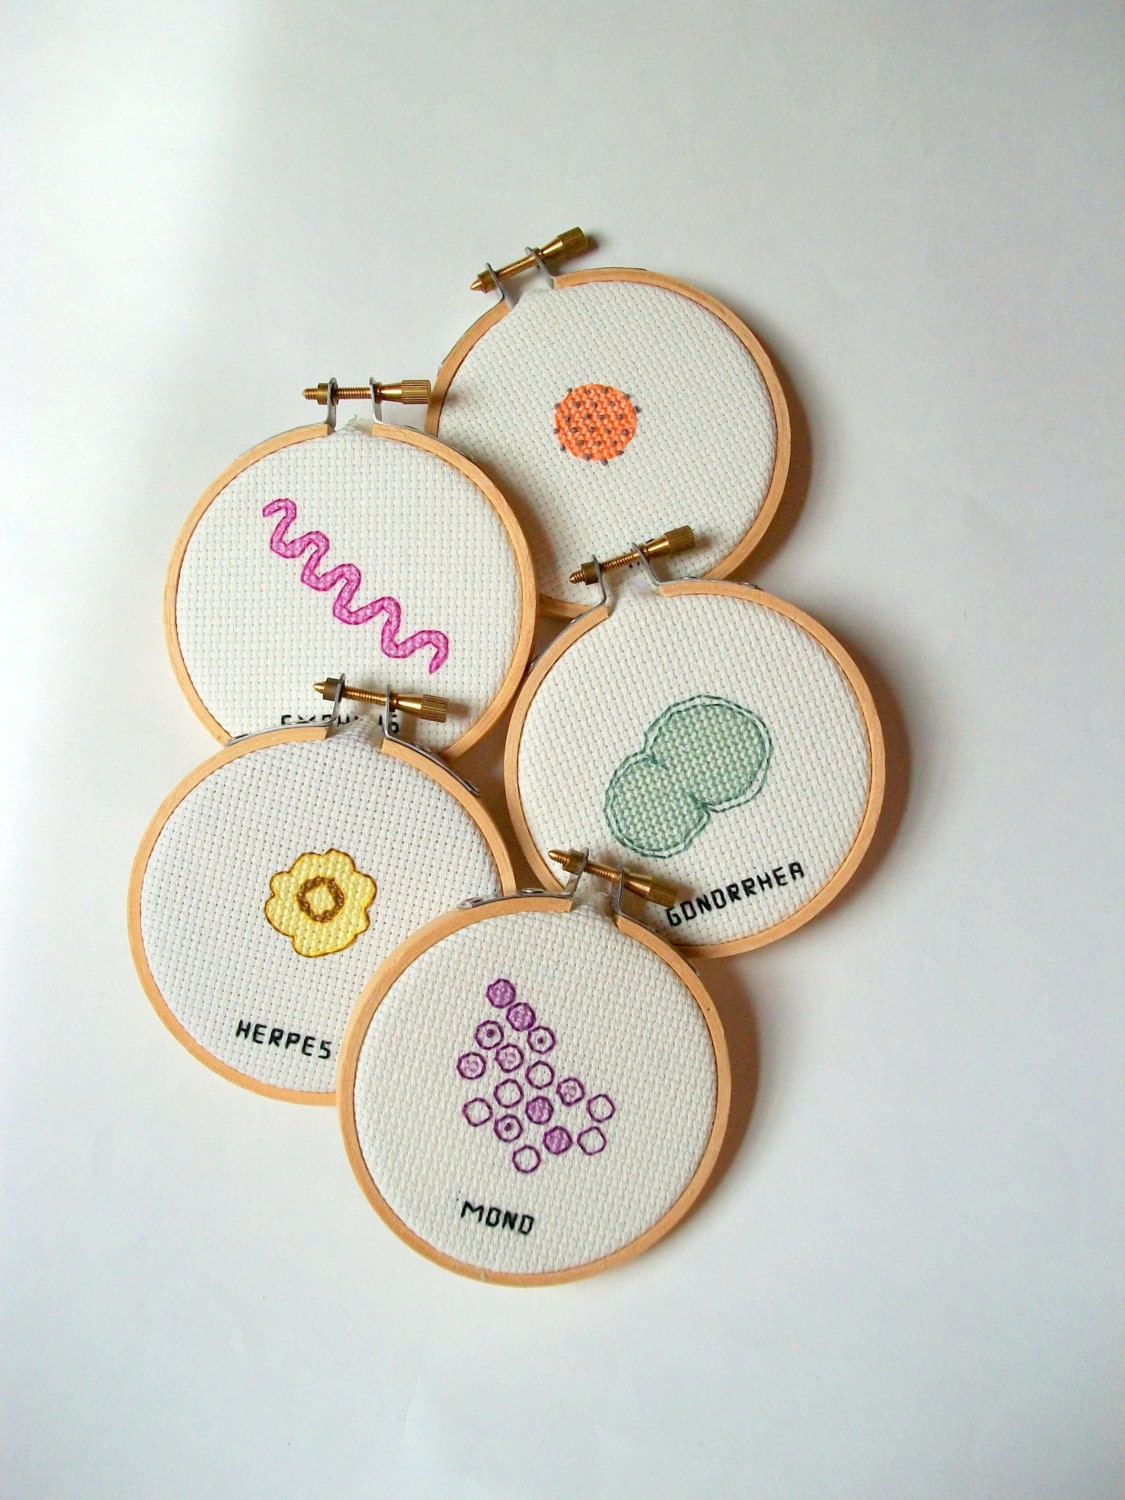 Instant Collection of STDs -- 5 STD Microbes cross stitch set for your wall, with syphilis, herpes, gonorrhea, HPV, Mono